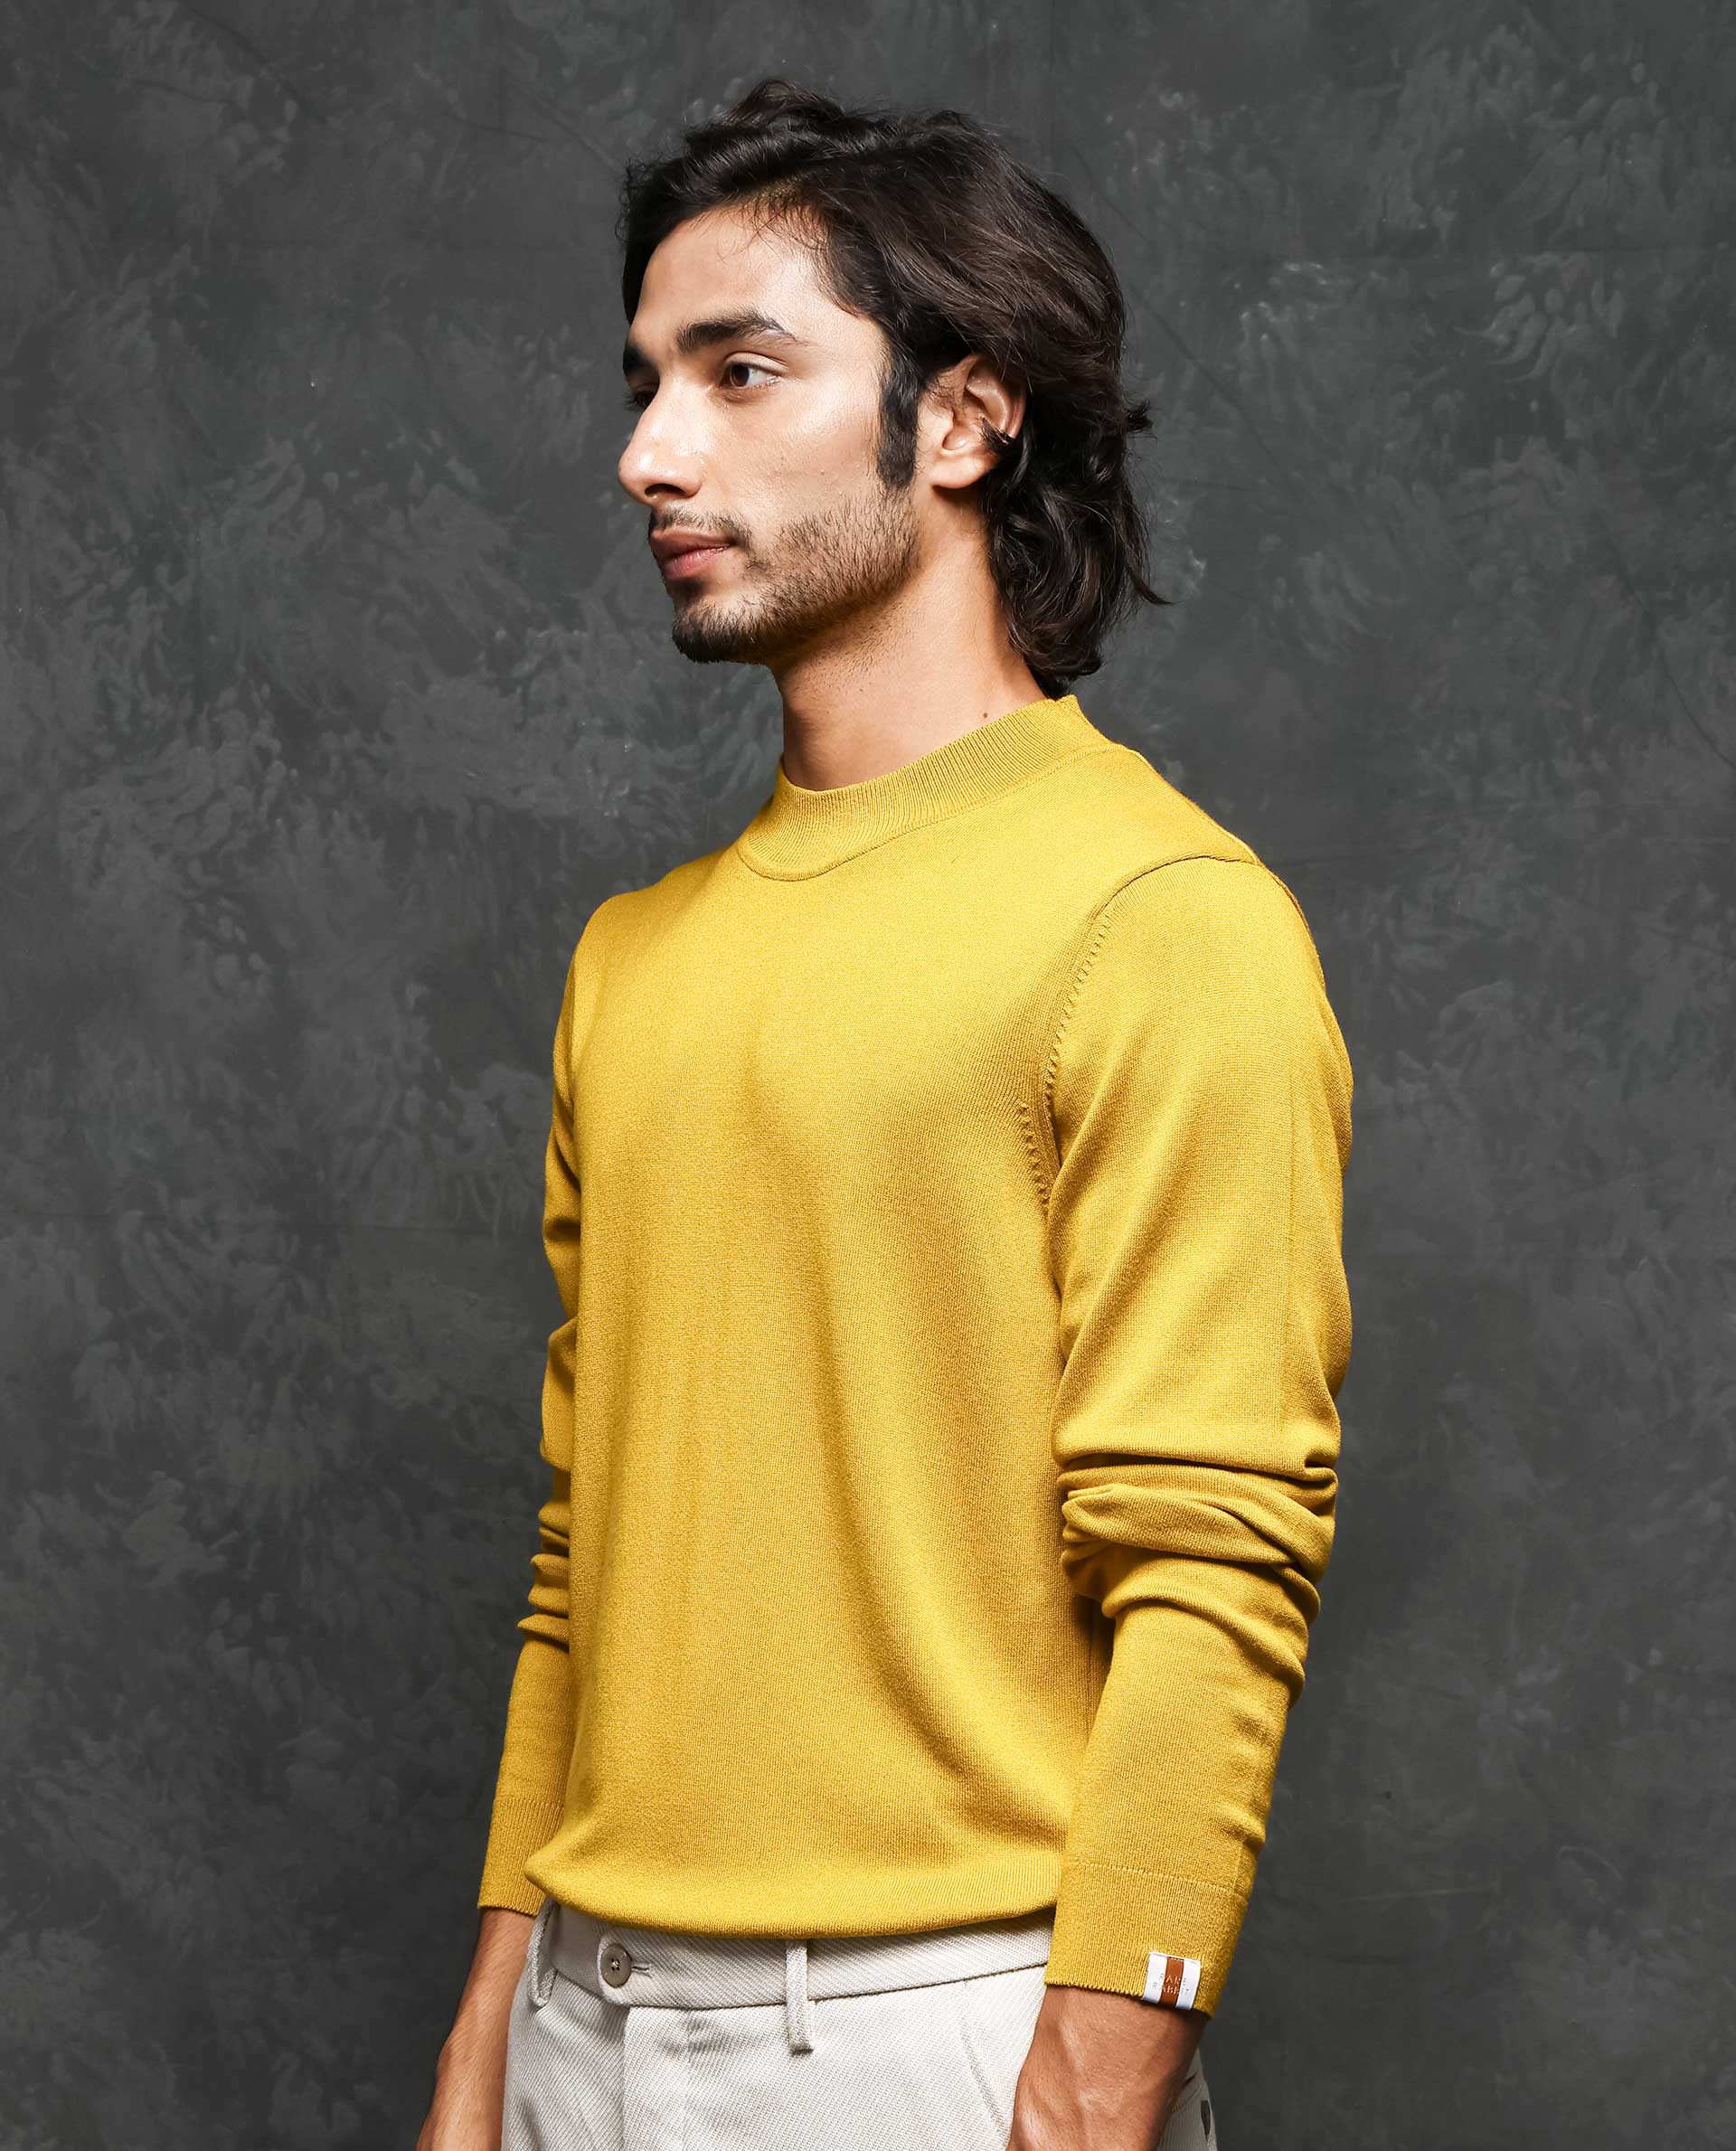 Full Sleeve Woolen Men's Plain Round neck Yellow Sweater at Rs 300